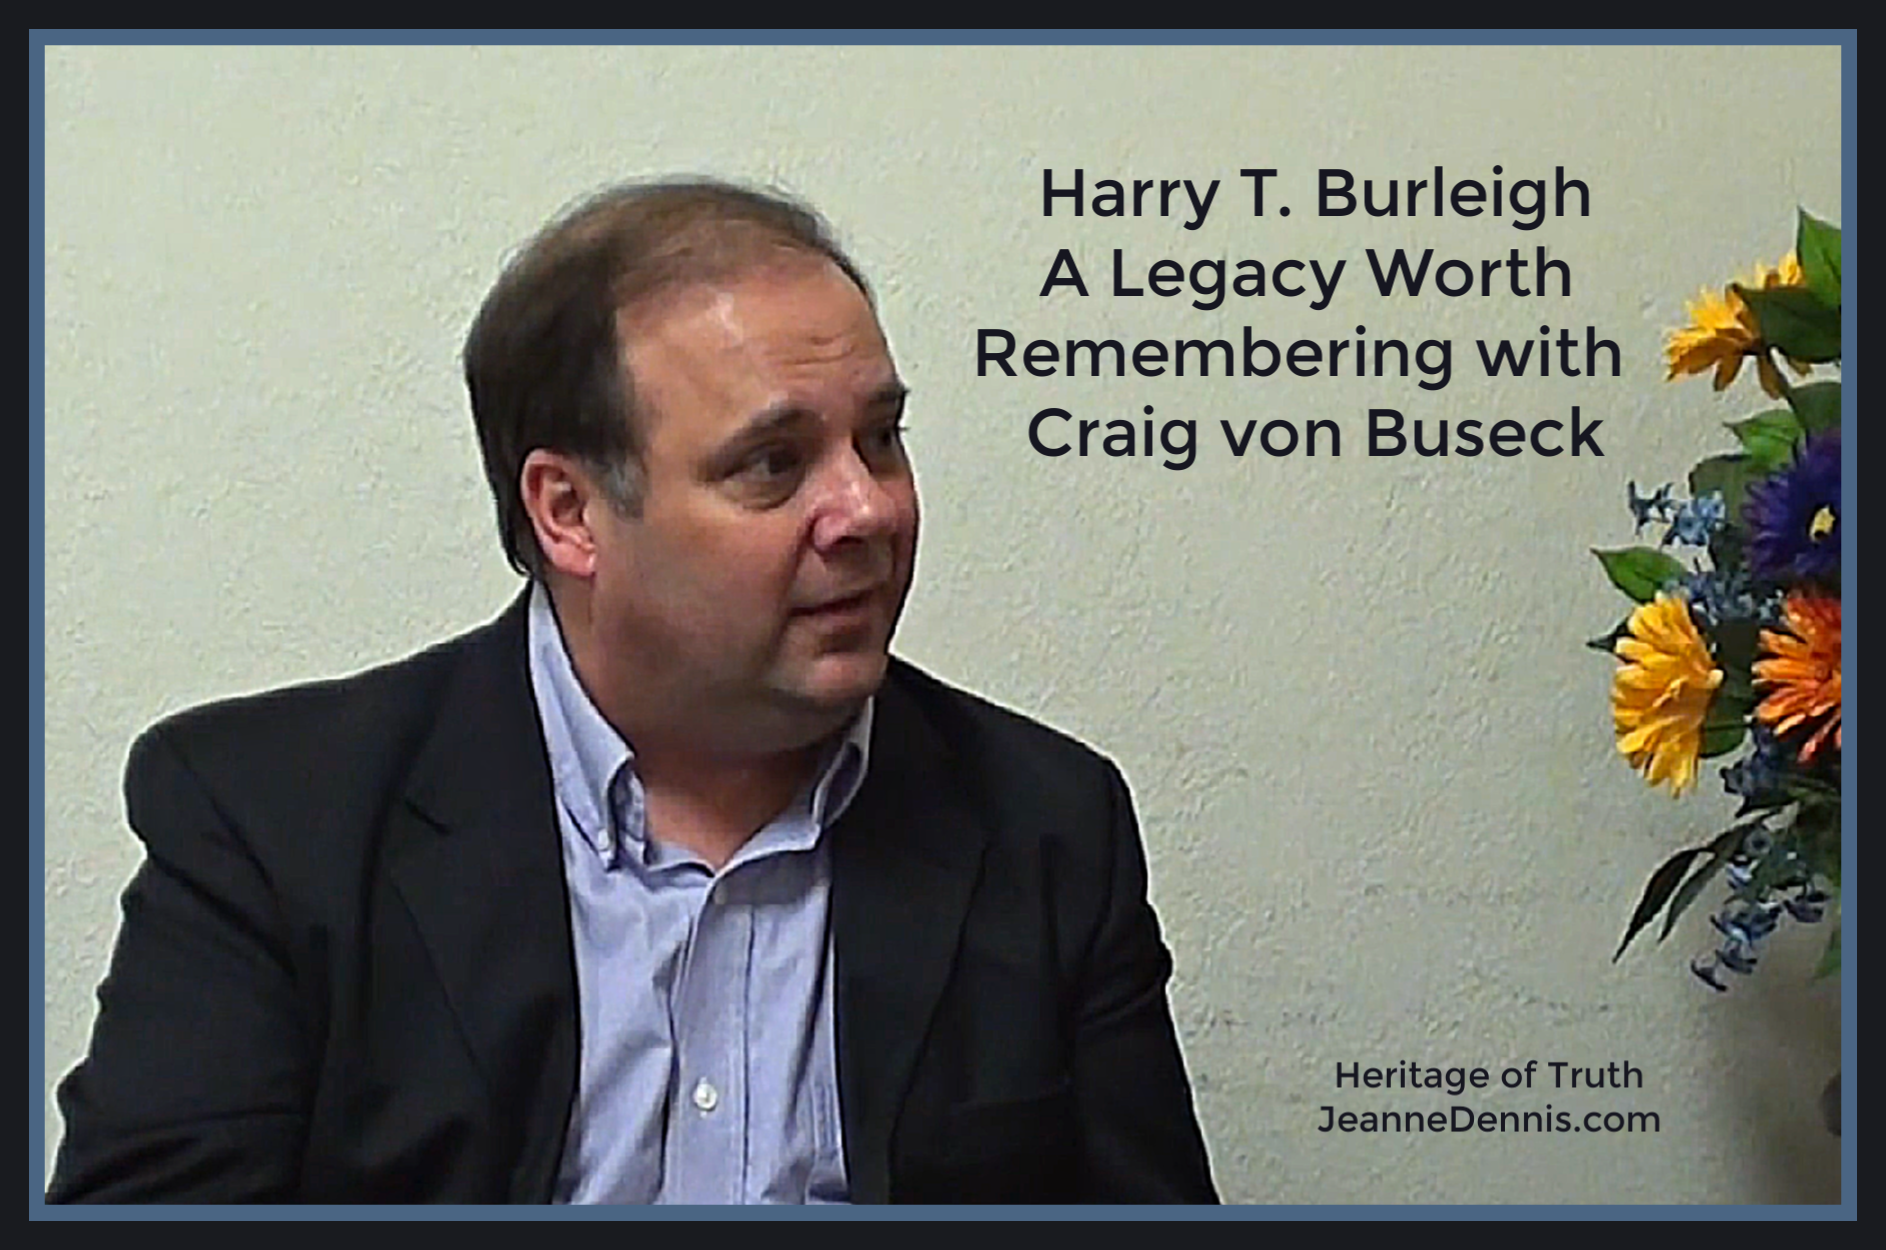 Harry T. Burleigh a Legacy Worth Remembering with Craig von Buseck, Heritage of Truth, JeanneDennis.com